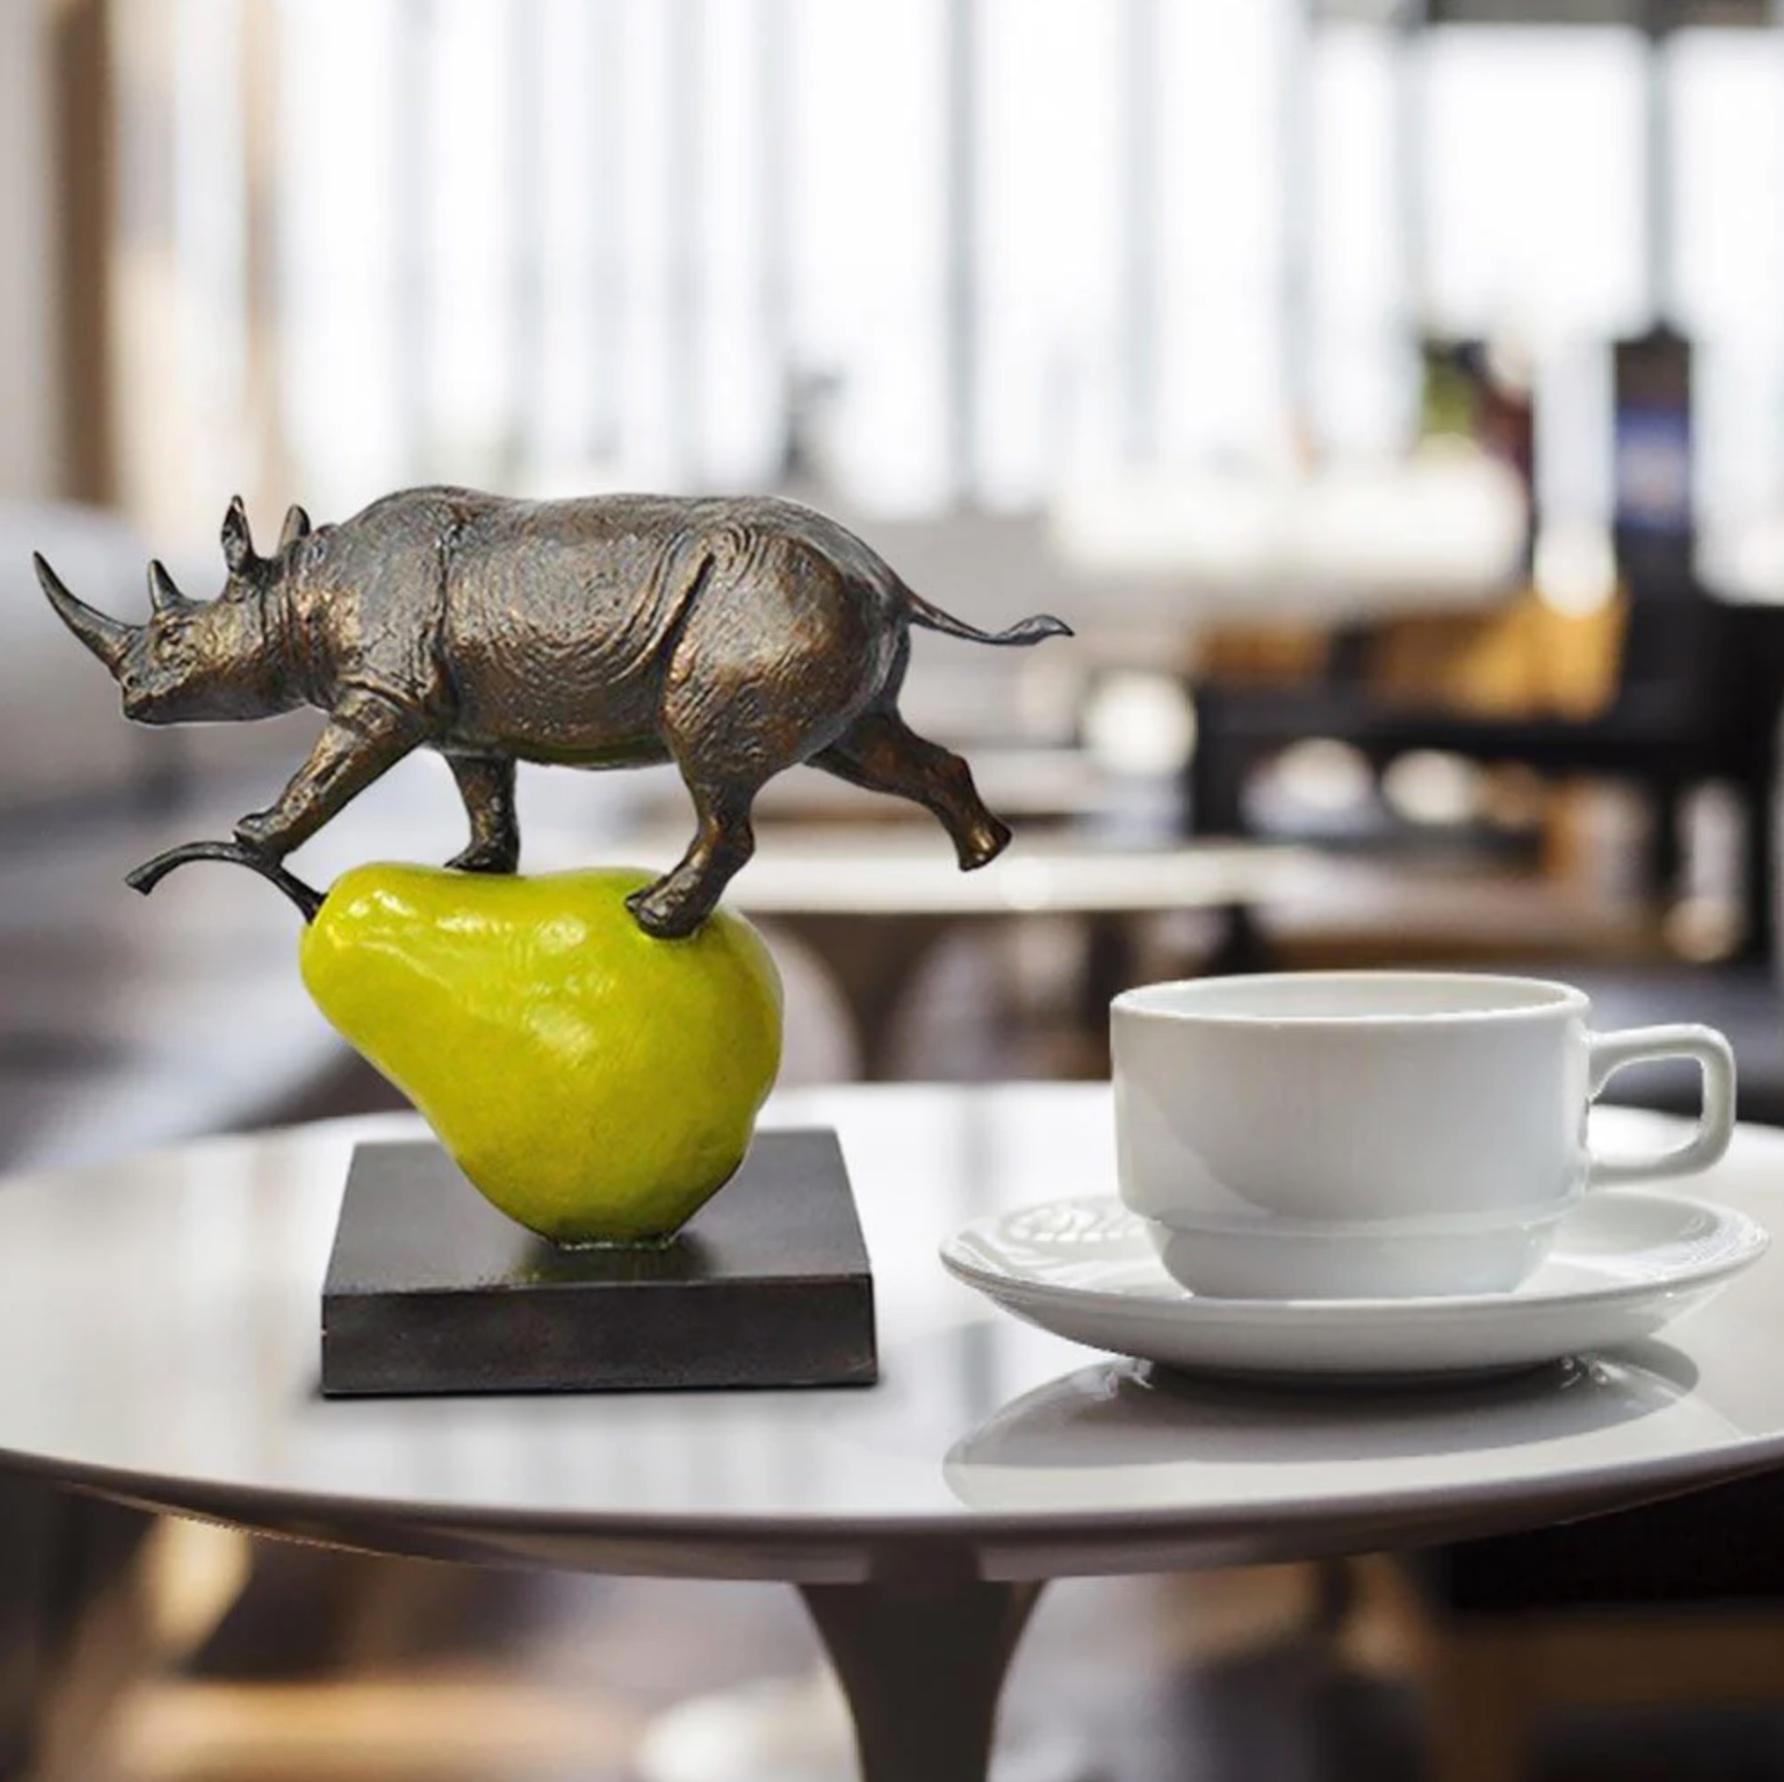 Title: The rhino was just pearfect
Authentic Small Bronze Sculpture

This authentic bronze sculpture titled 'The rhino was just pearfect' by artists Gillie and Marc has been meticulously crafted in bronze. This sculpture features a rhino standing on